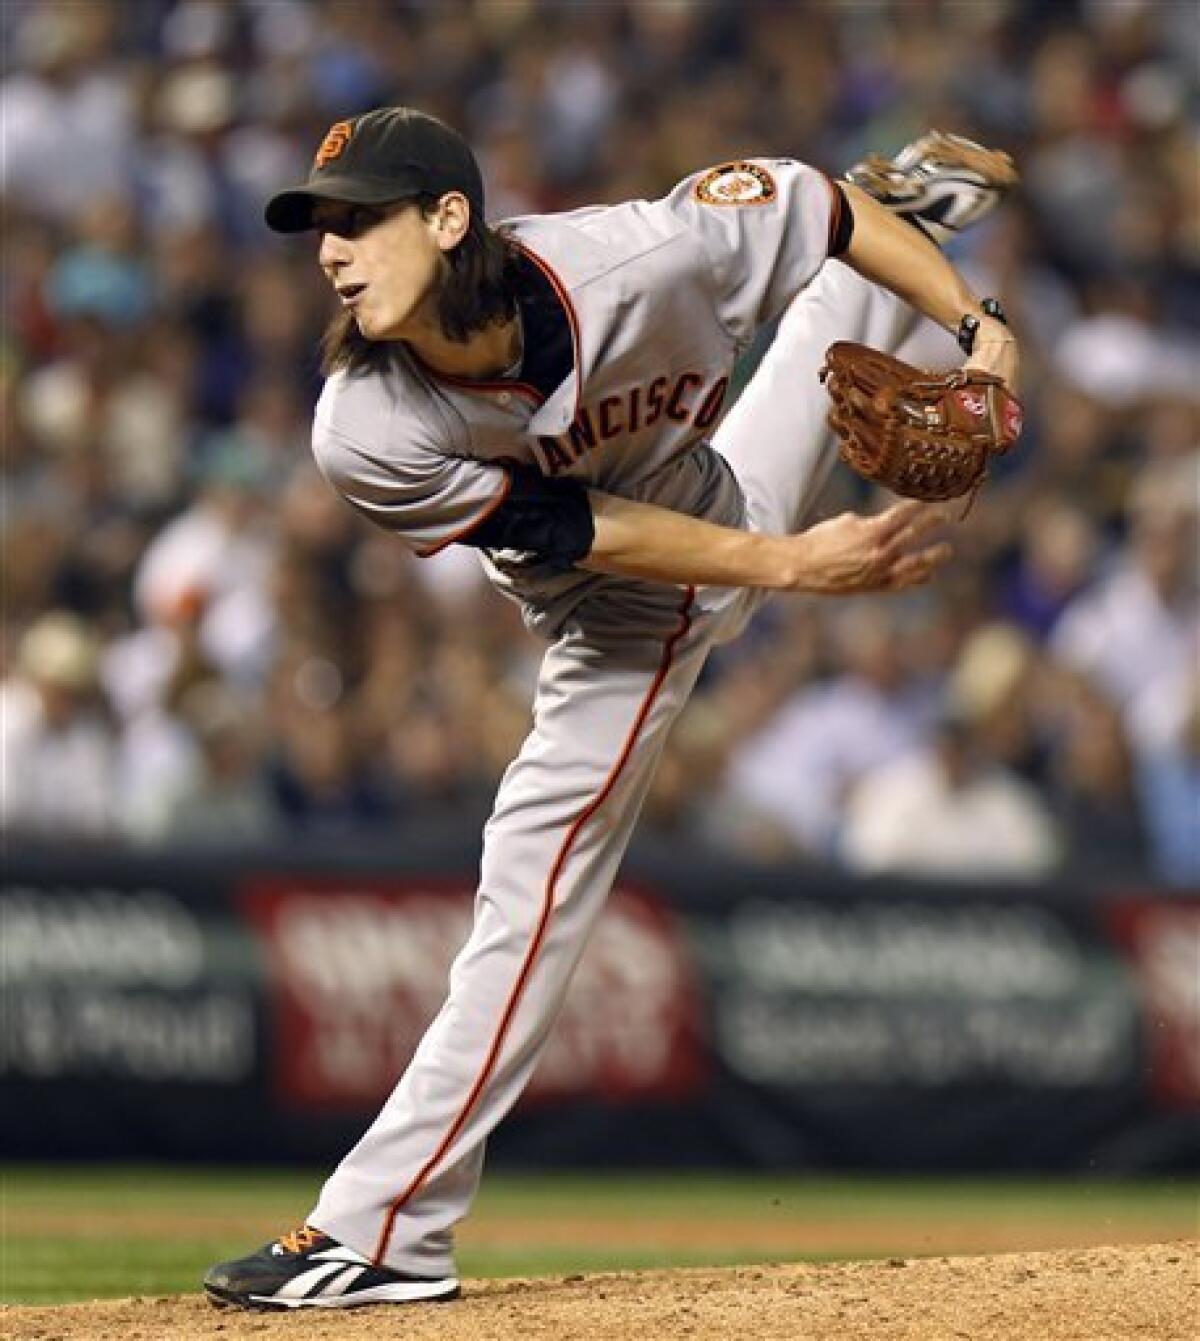 The real reason why Tim Lincecum hasn't pitched in a while. - post